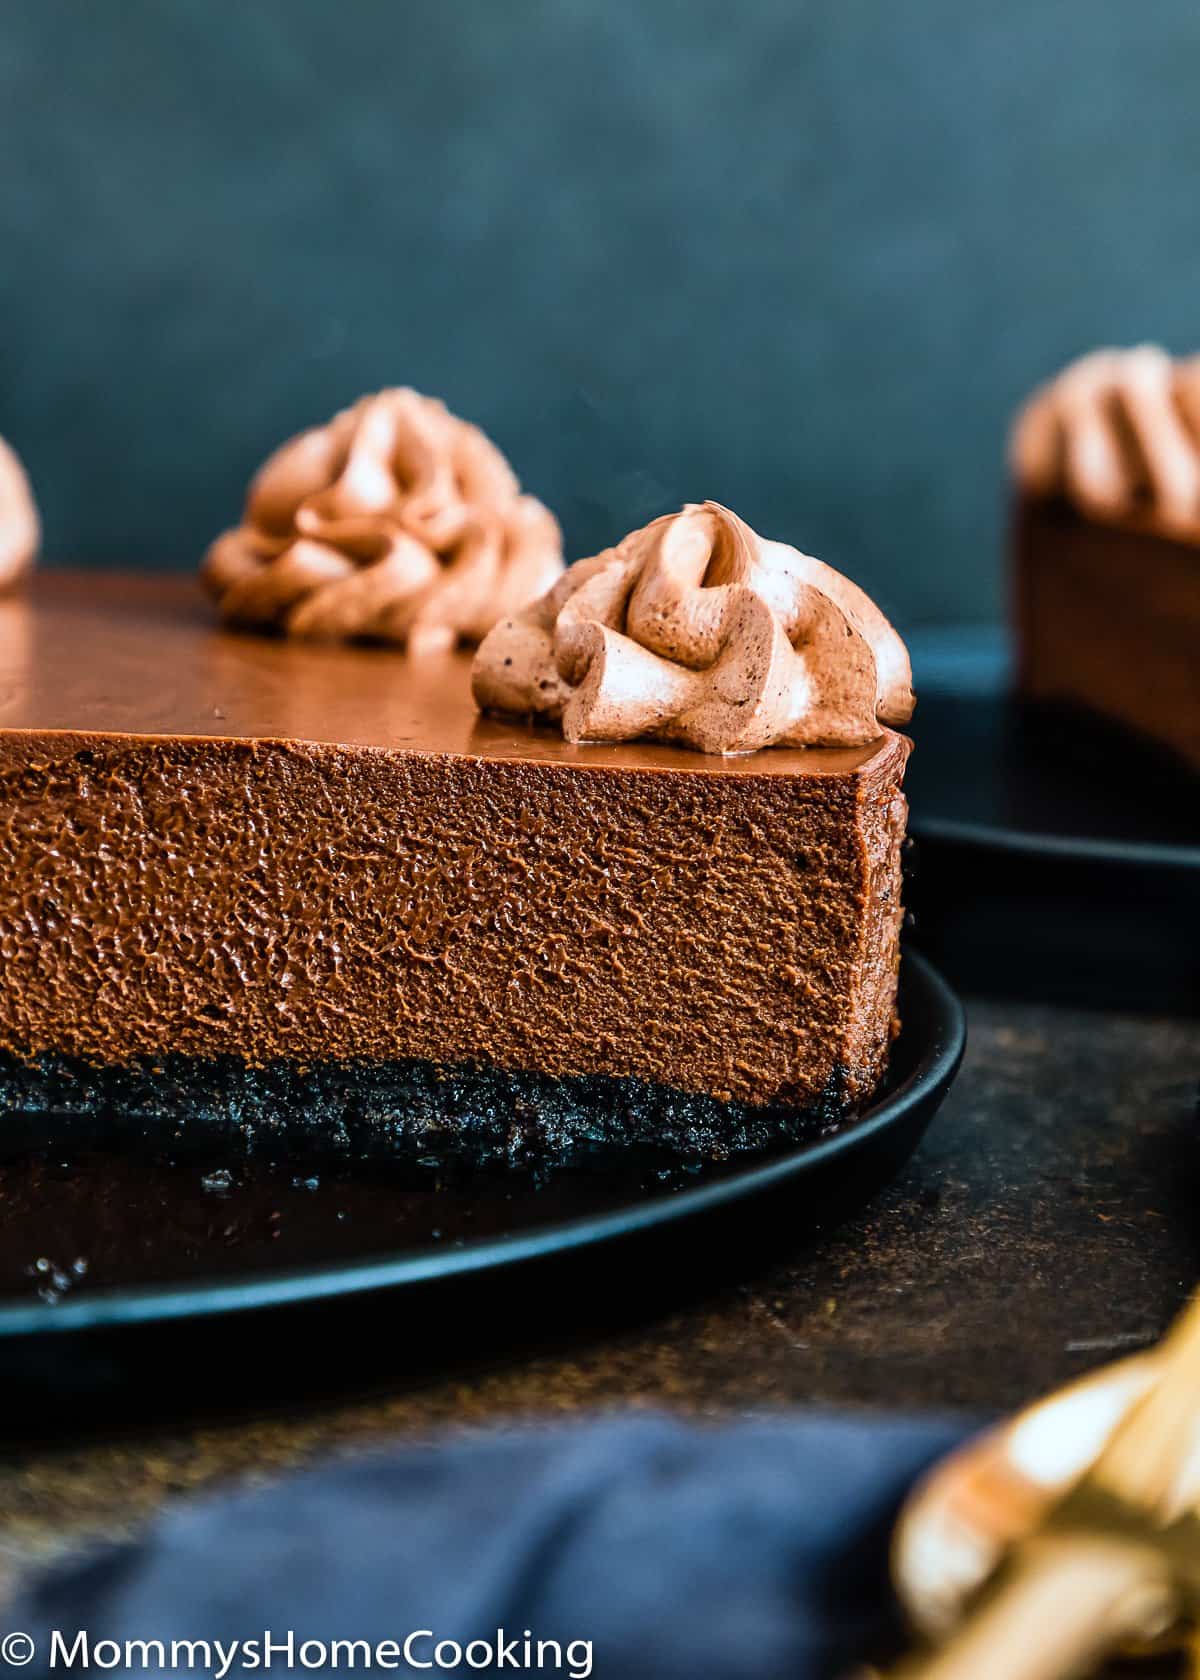 Eggless Chocolate cheesecake sliced showing creamy texture